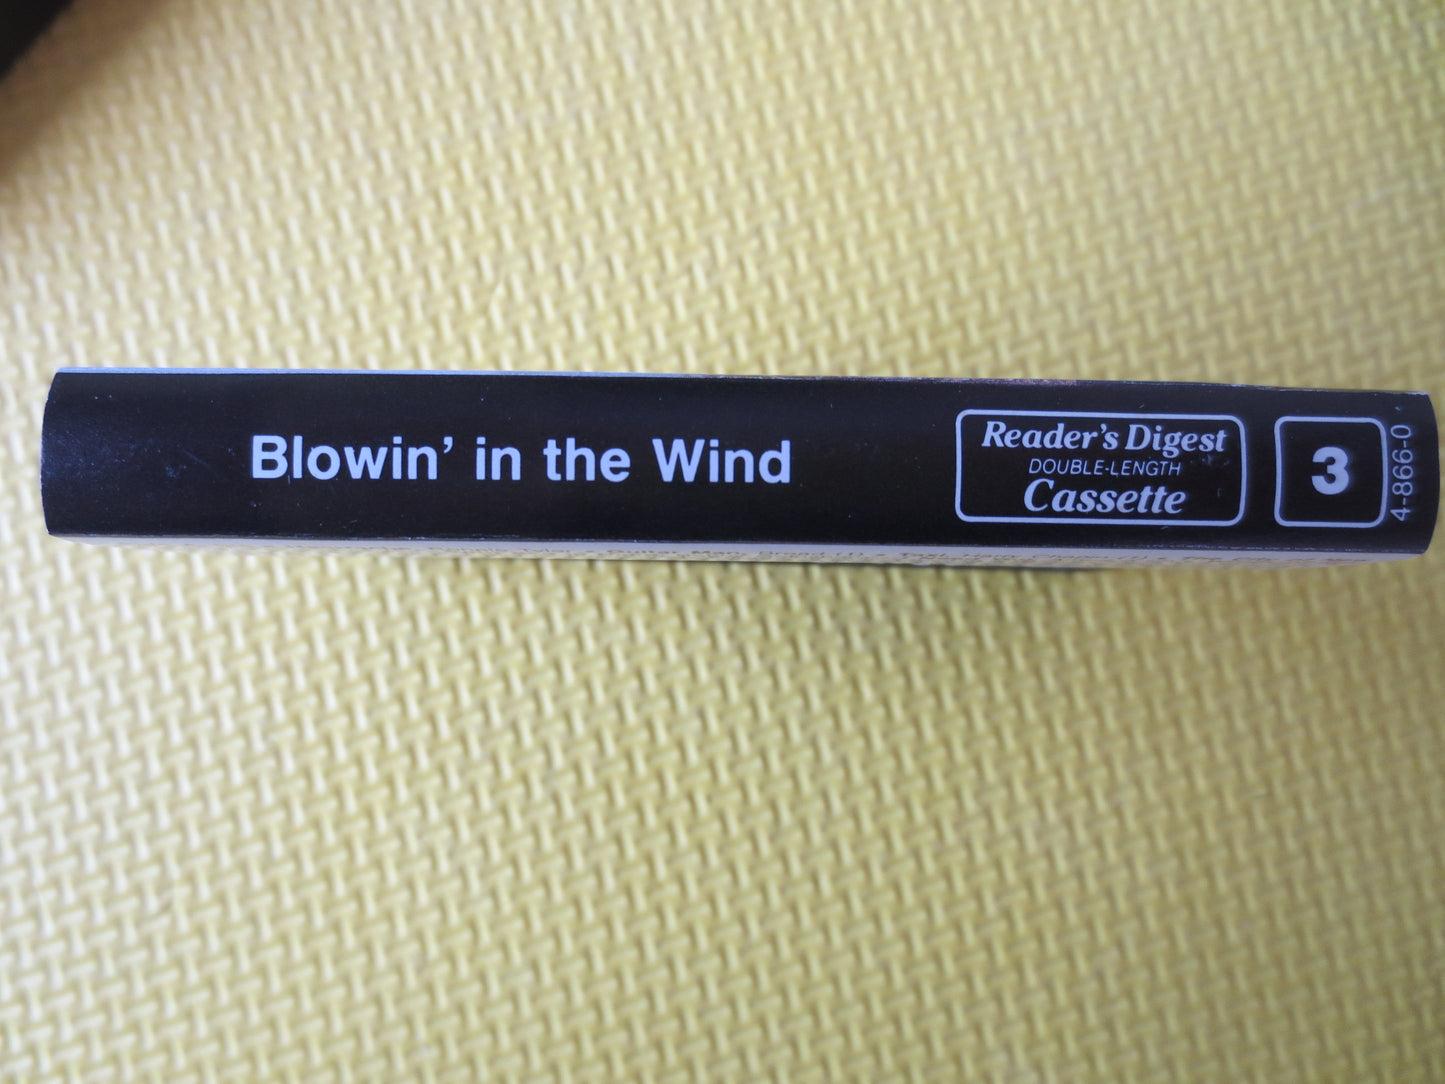 BLOWIN' in the WIND, Volume 2, Readers Digest, Rock Music, Rock and Roll Tape, Rock Music Cassette, Music Cassettes, 1985 Cassette